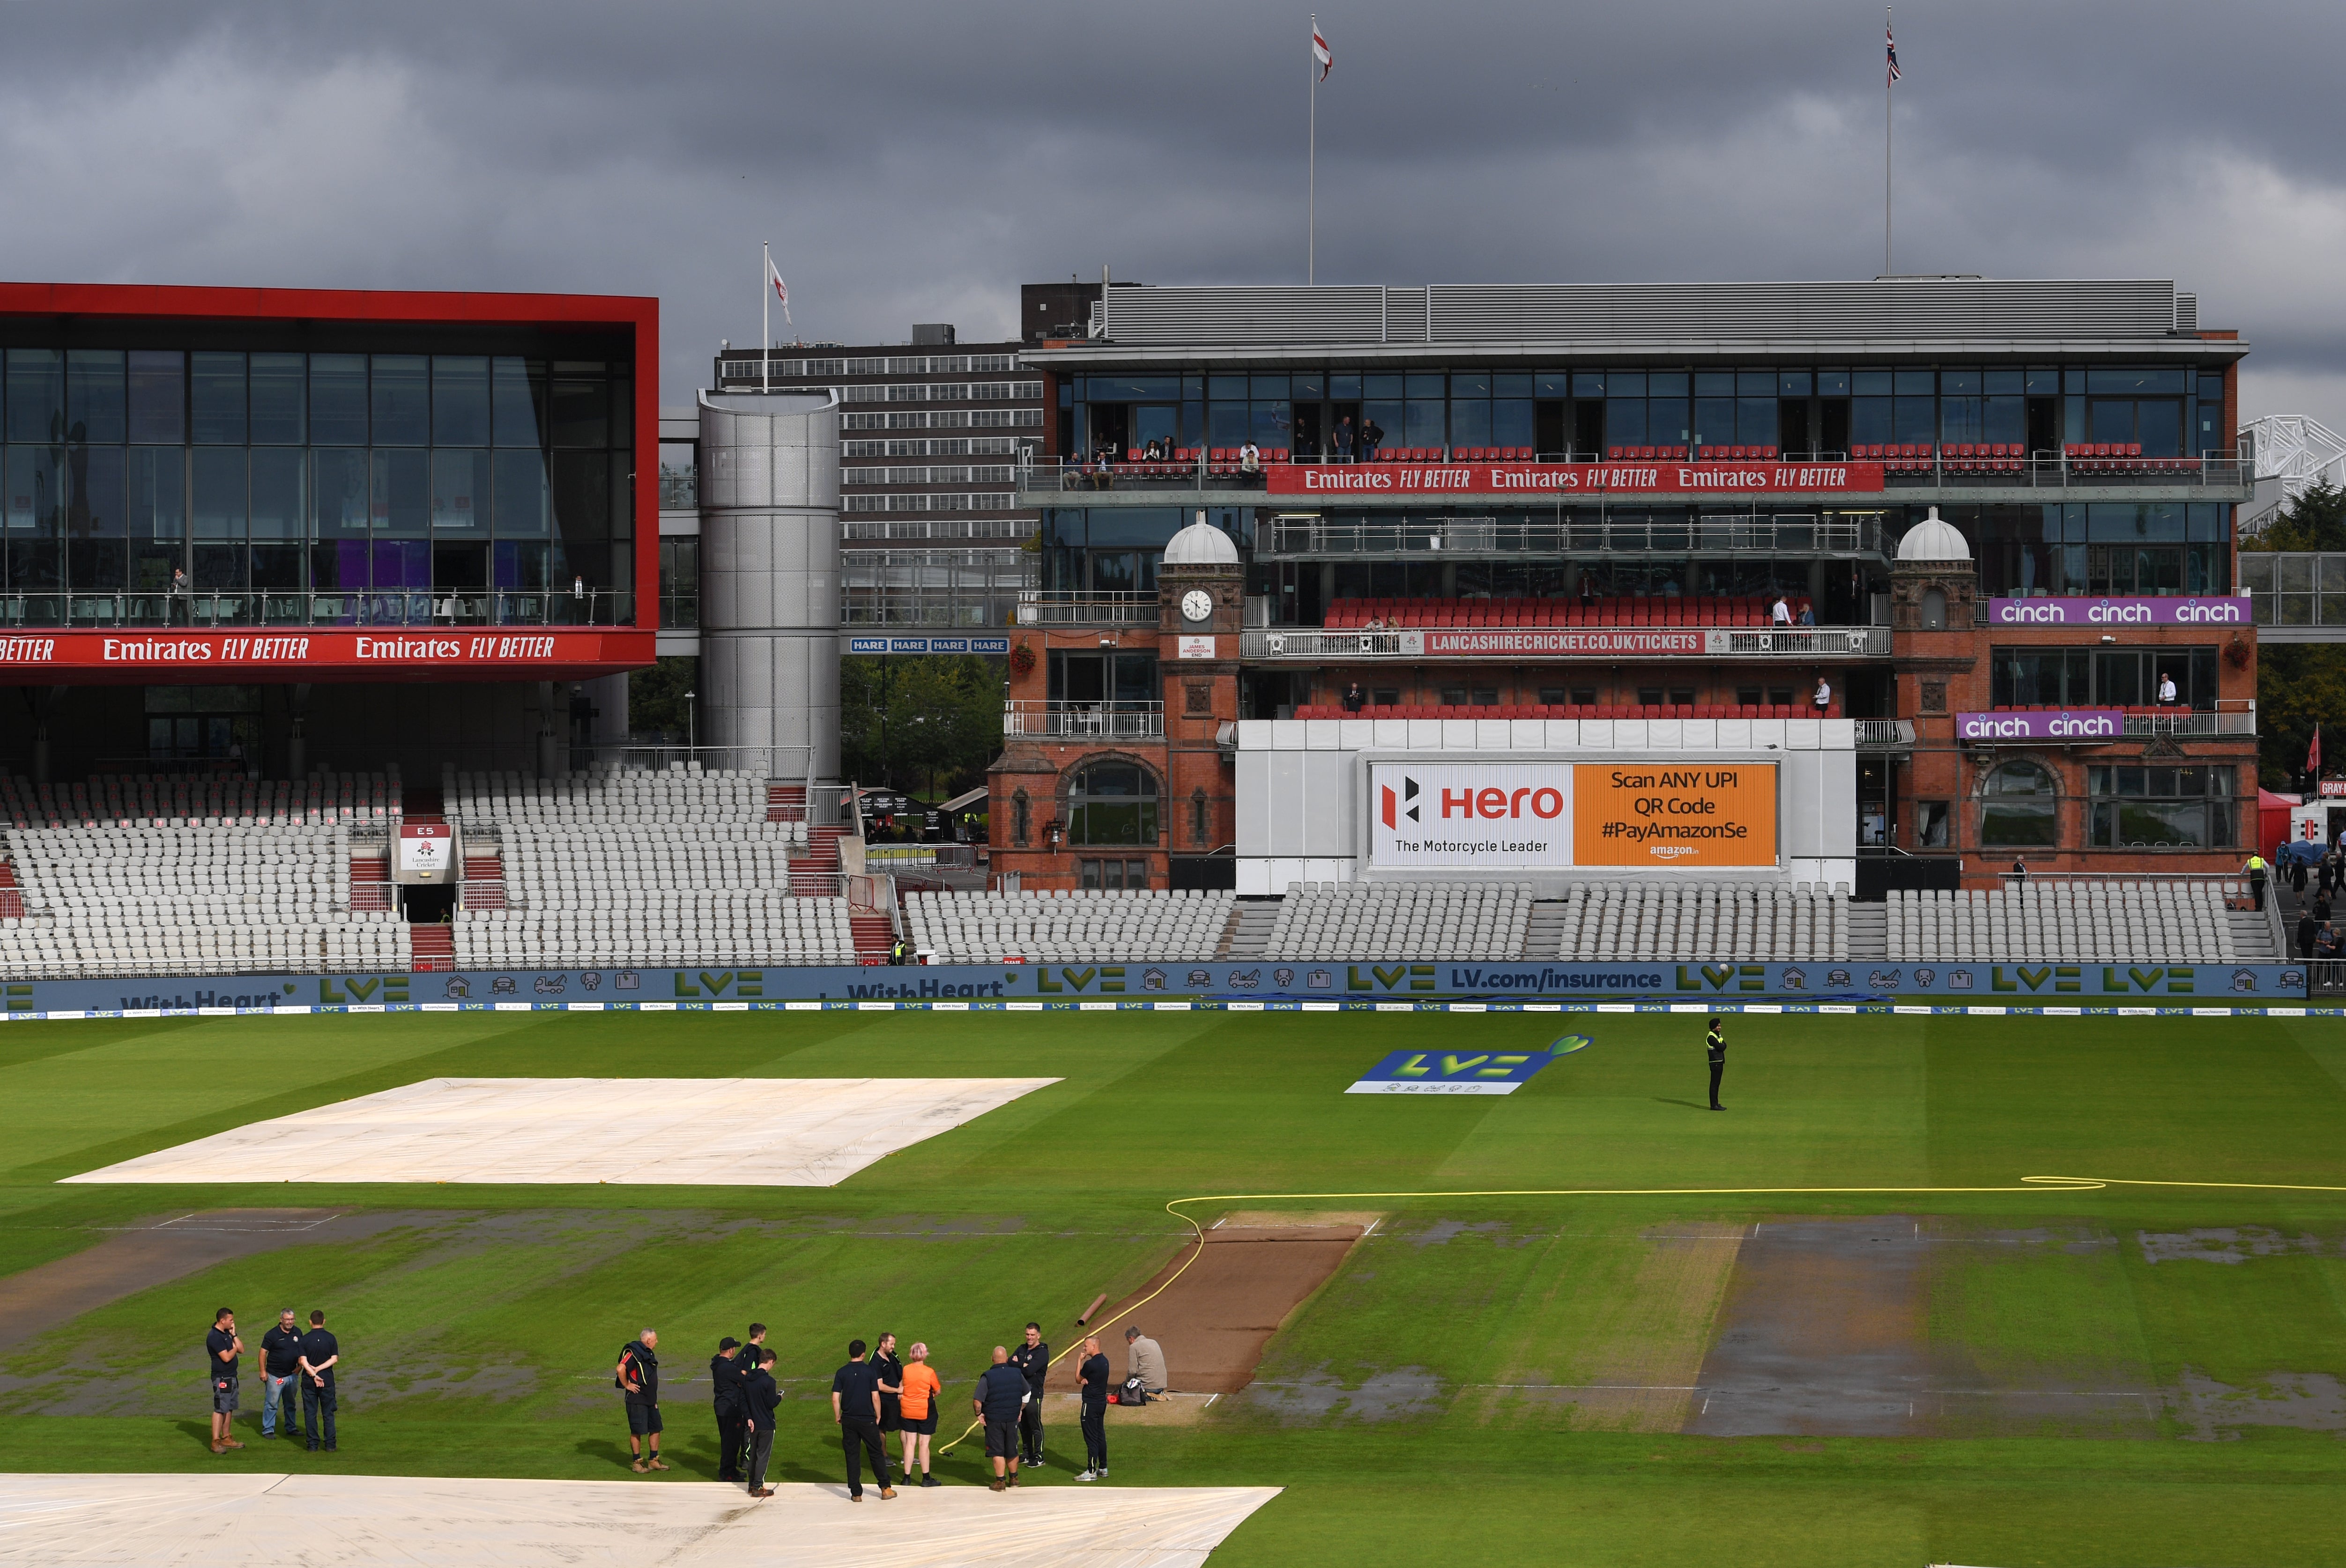 The Old Trafford test was cancelled